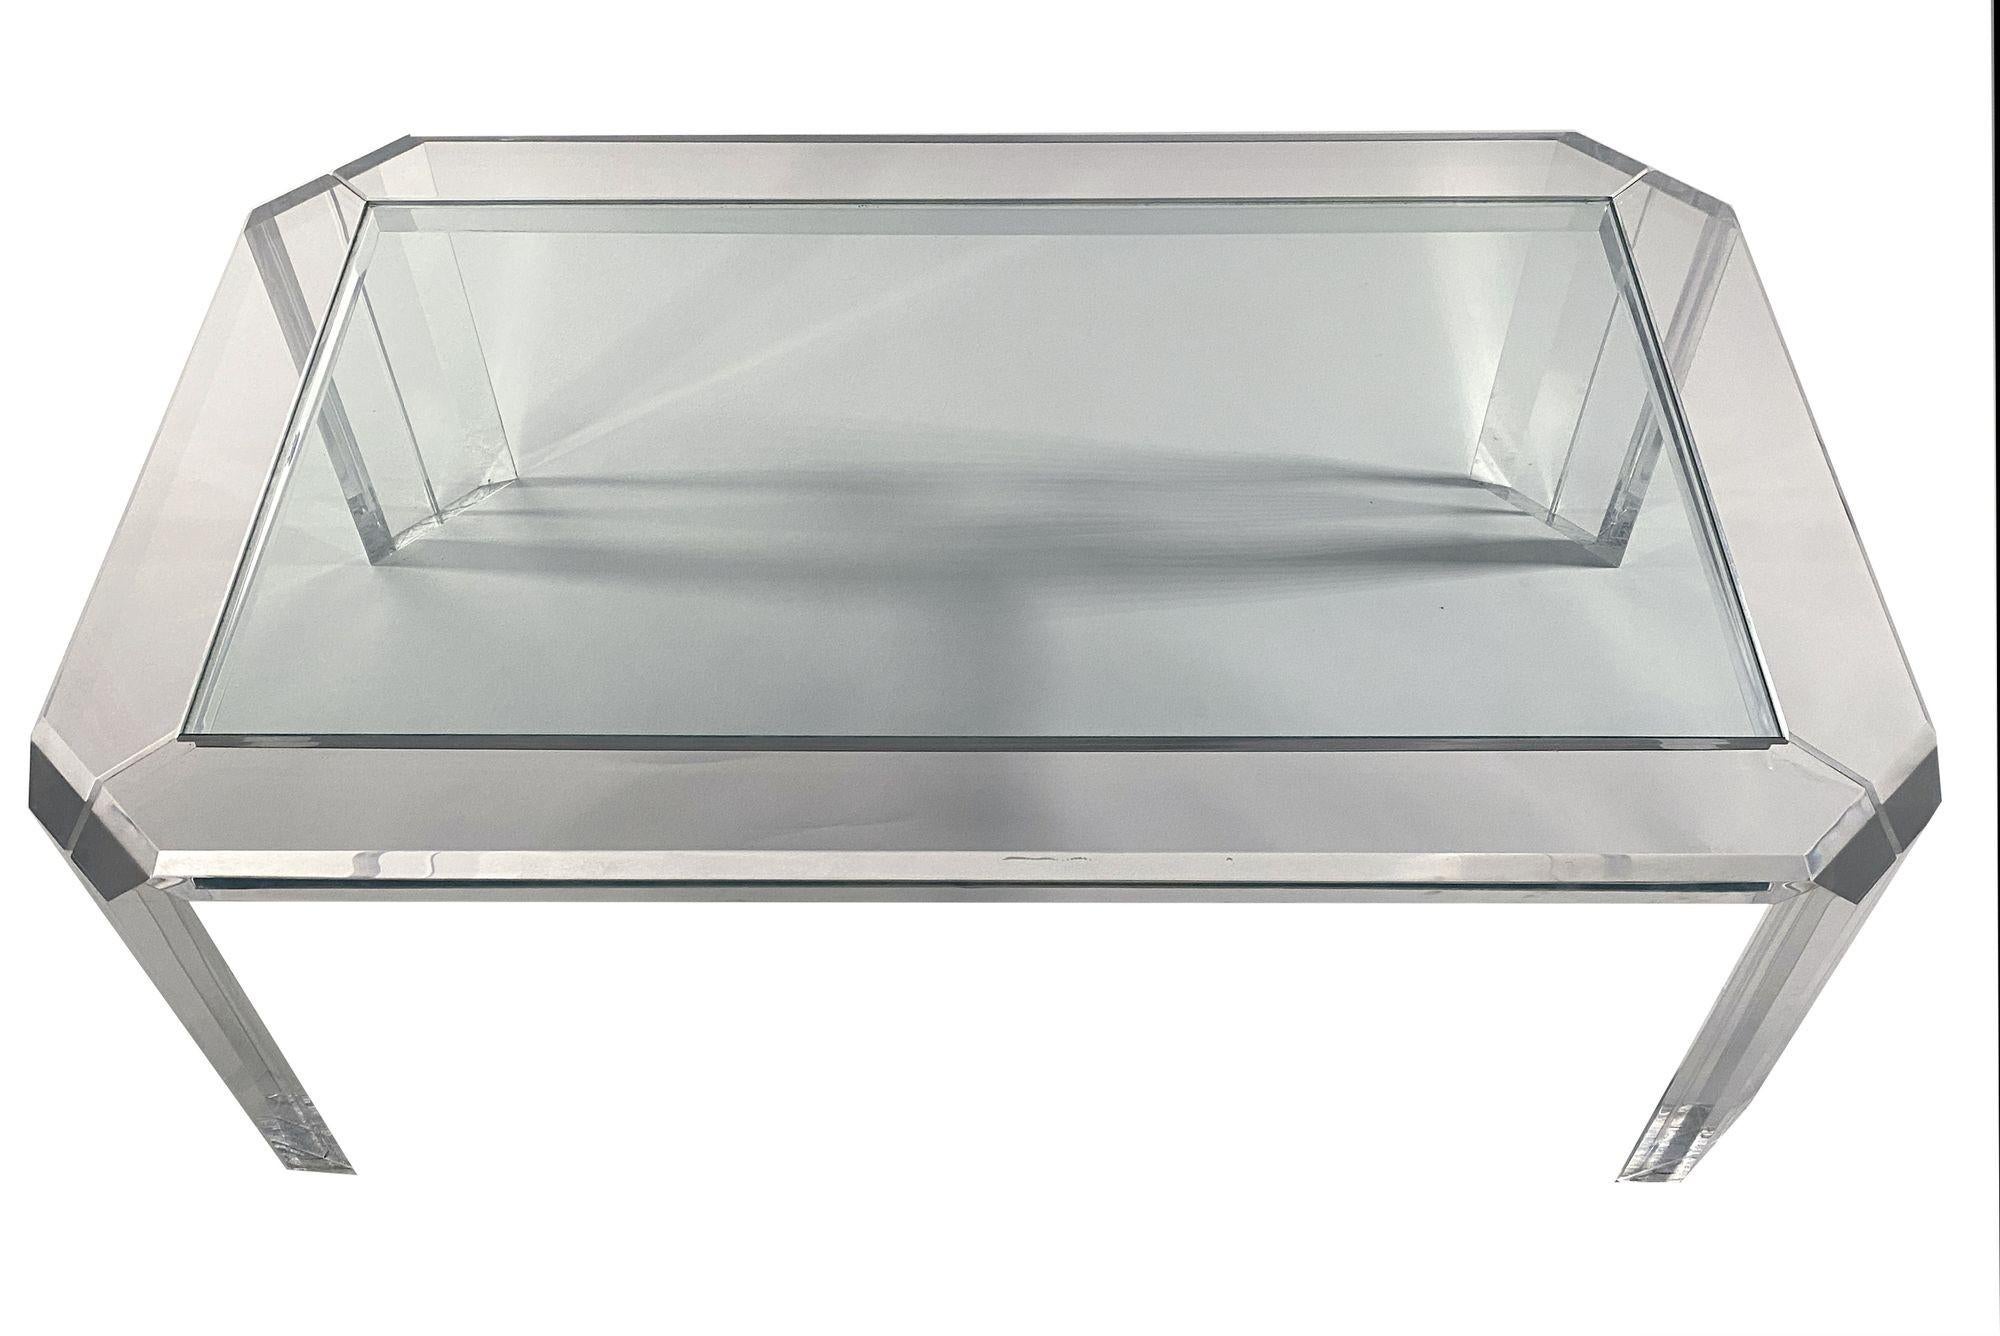 Americam modern rectangular cocktail table. By lucite artist Charles Hollis Jones.
The rectangular table with faceted corners to give it a softer appearance.
Glass is inset into the lucite frame for safety and convenience.